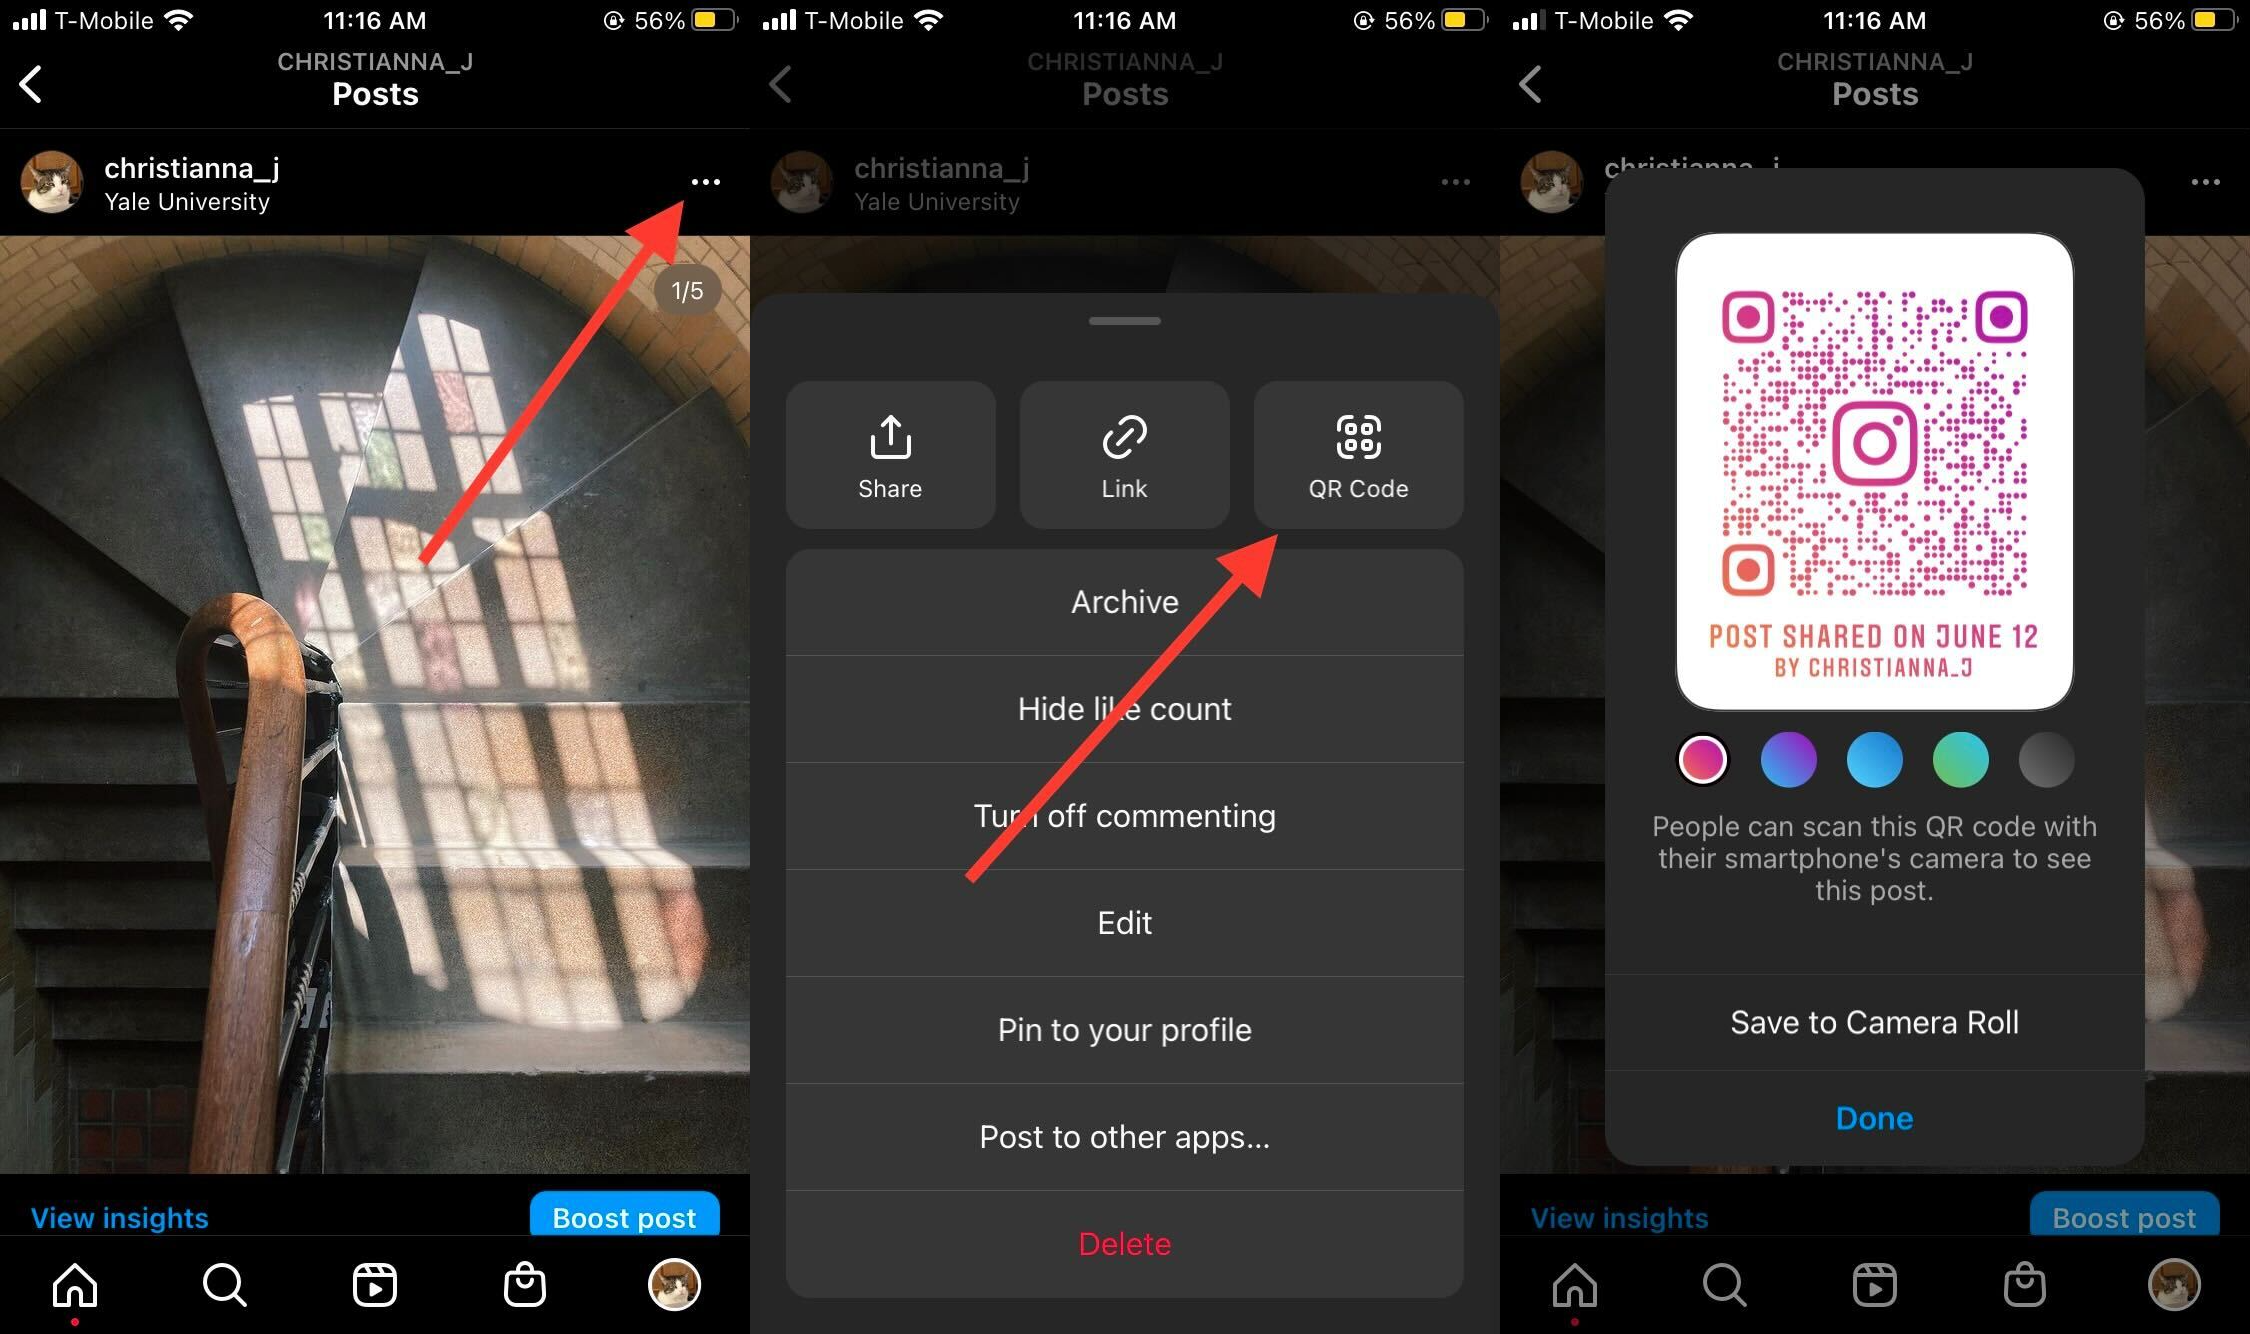 Instagram just quietly added QR codes for posts